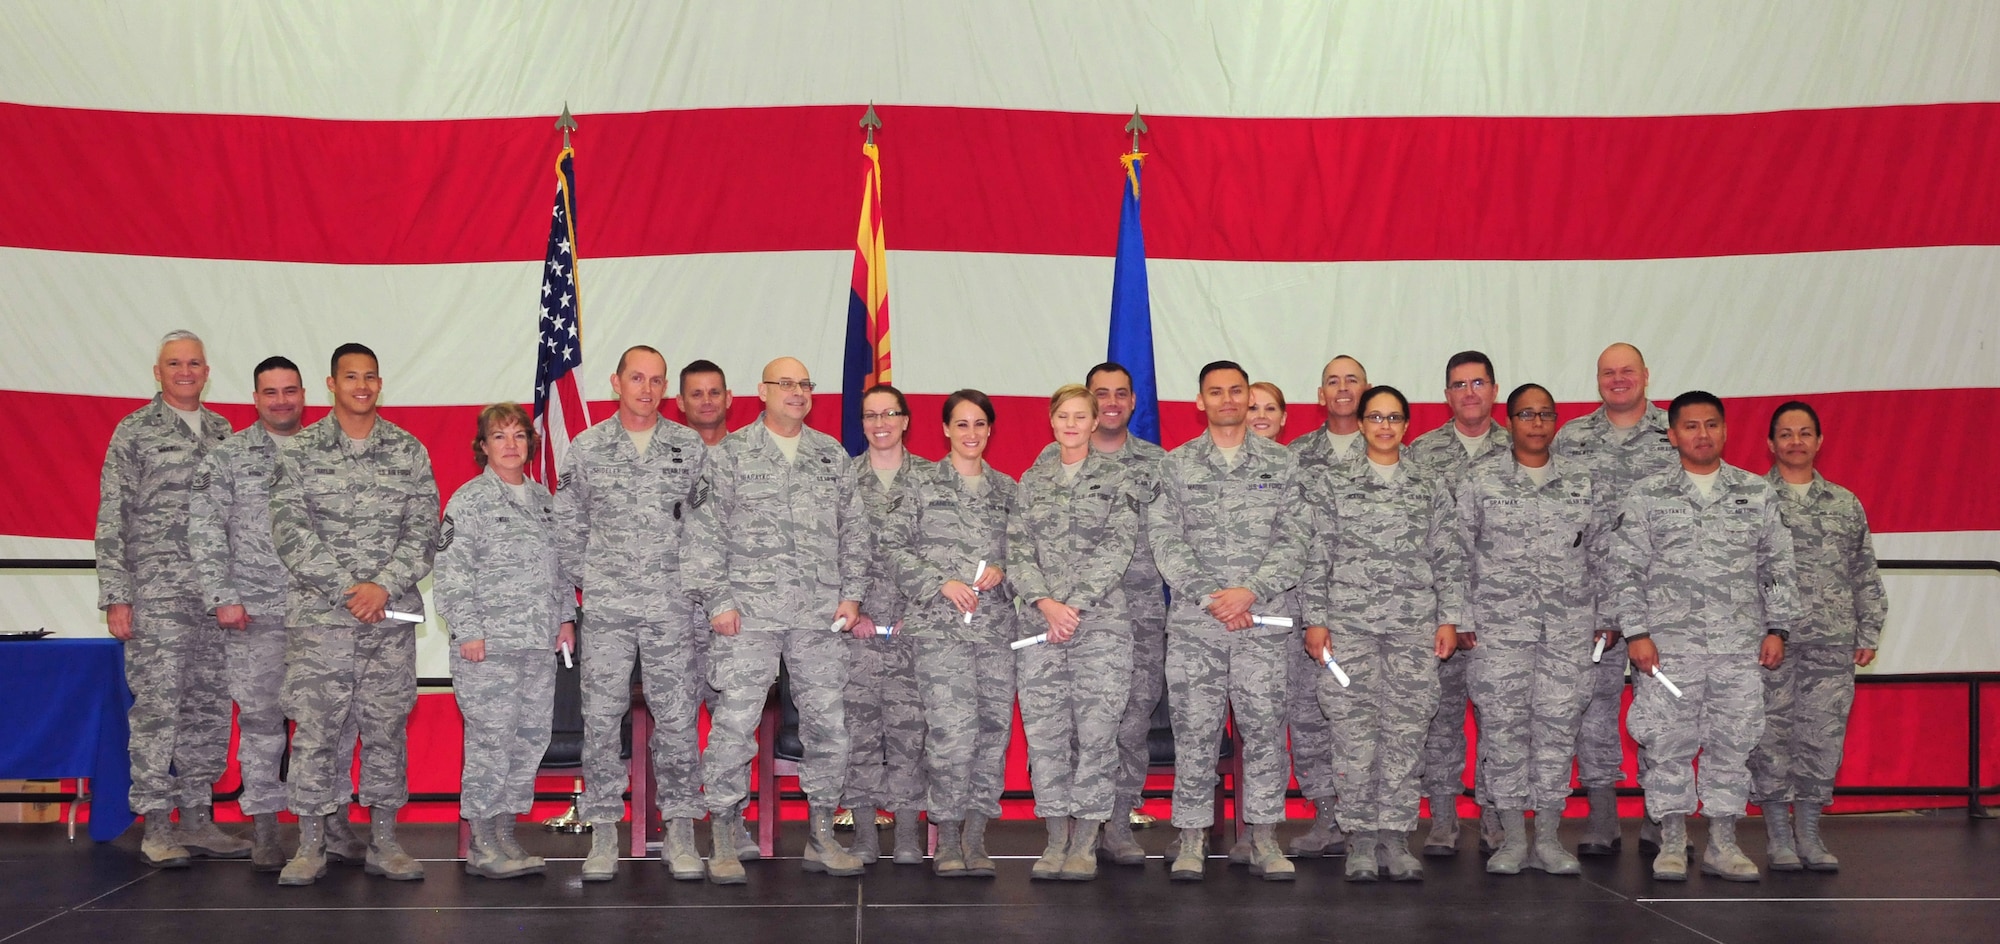 The 161st Air Refueling Wing, Phoenix Air National Guard Base, held its annual awards ceremony March 8, which recognized Airmen who completed their Community College of the Air Force associates degree in 2014. (U. S. Air National Guard photo by Master Sgt. Kelly M. Deitloff) 